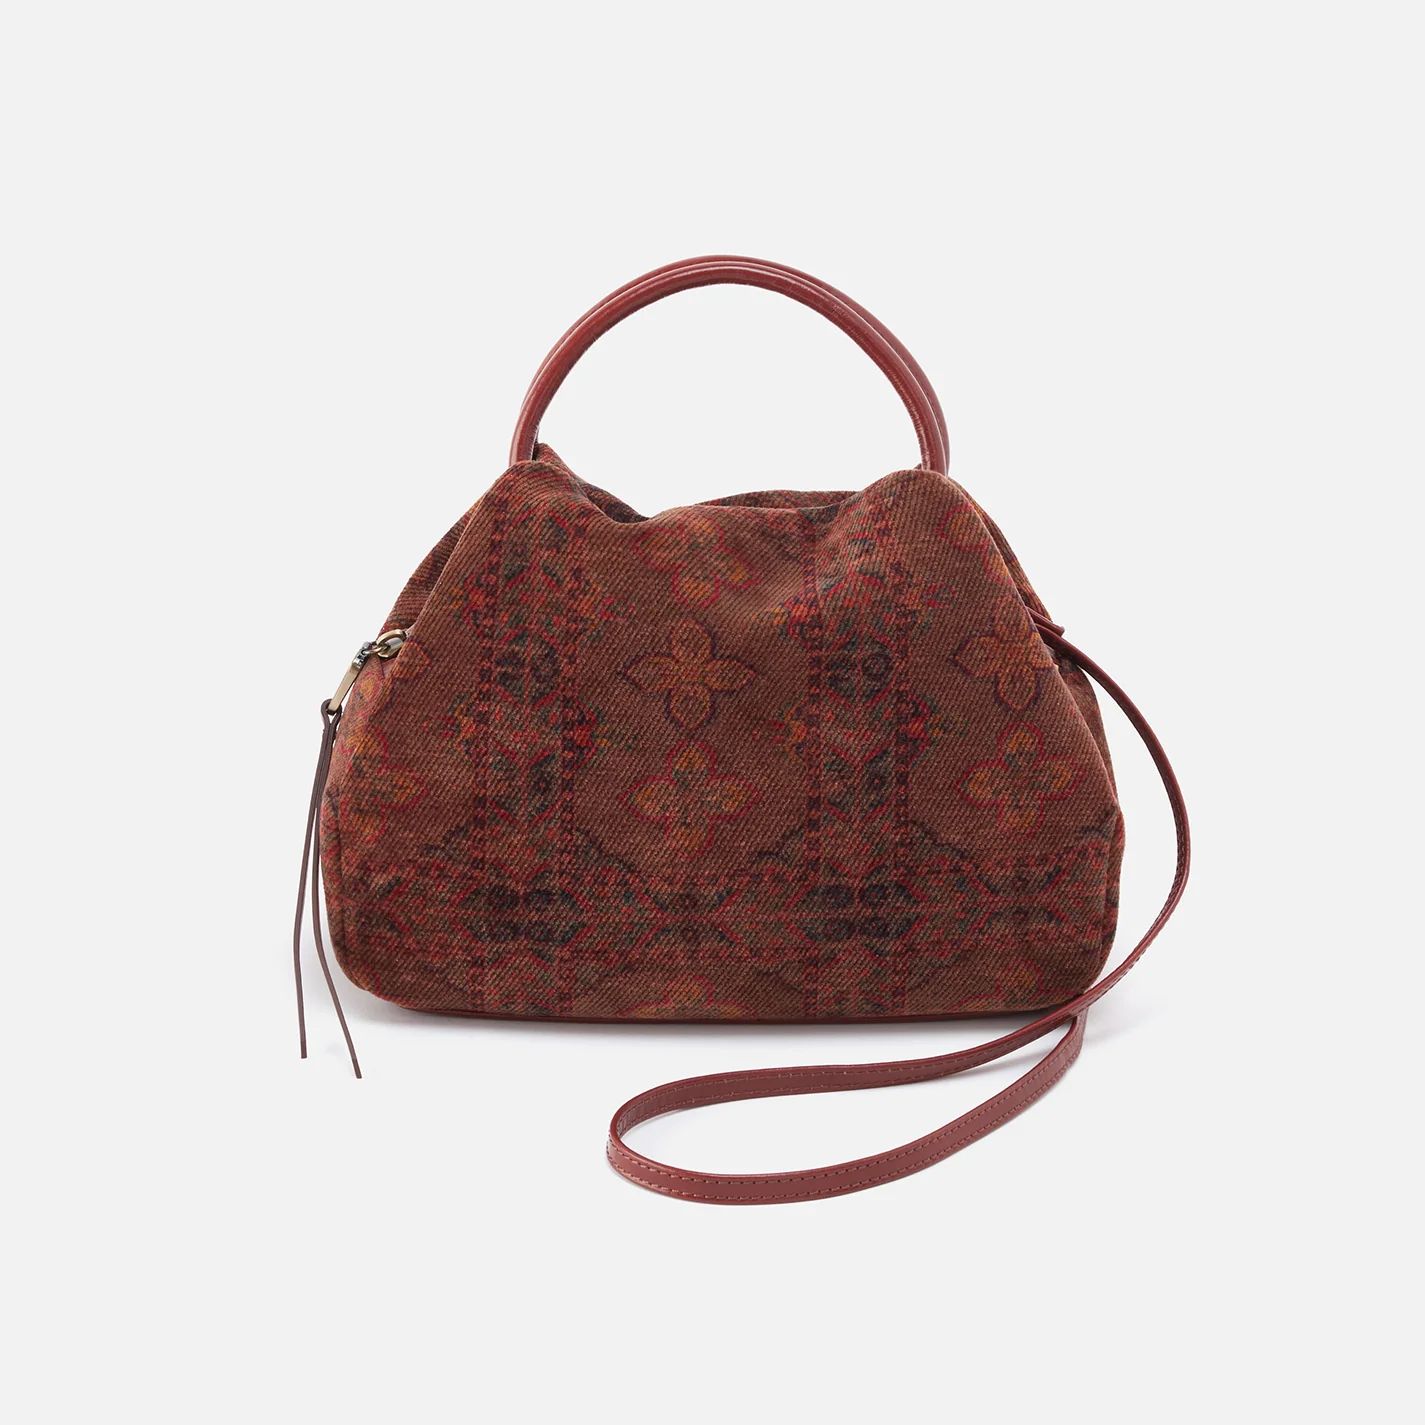 Darling Small Satchel in Tapestry Fabric With Leather Trim - Arabesque | HOBO Bags